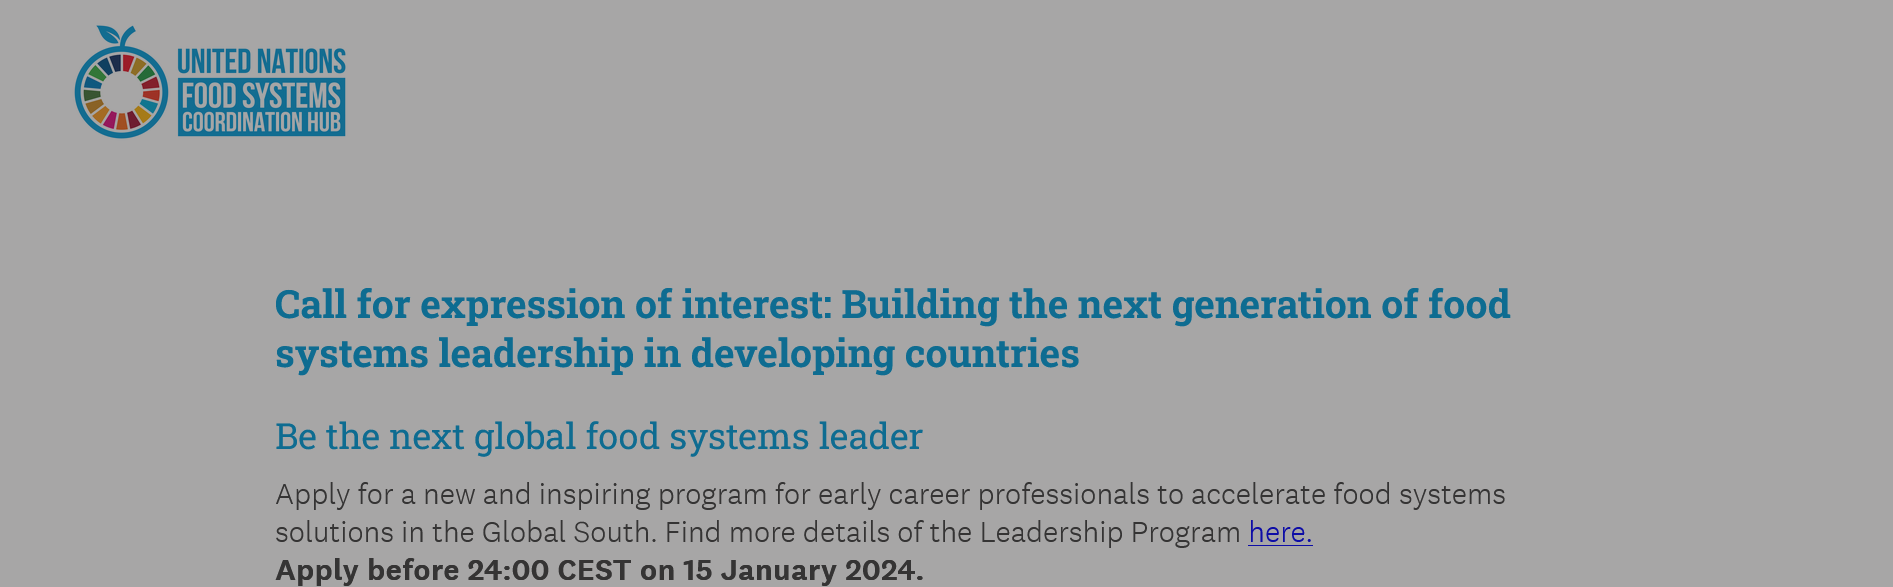 United Nations Youth Leadership Program - Developing Countries 2024